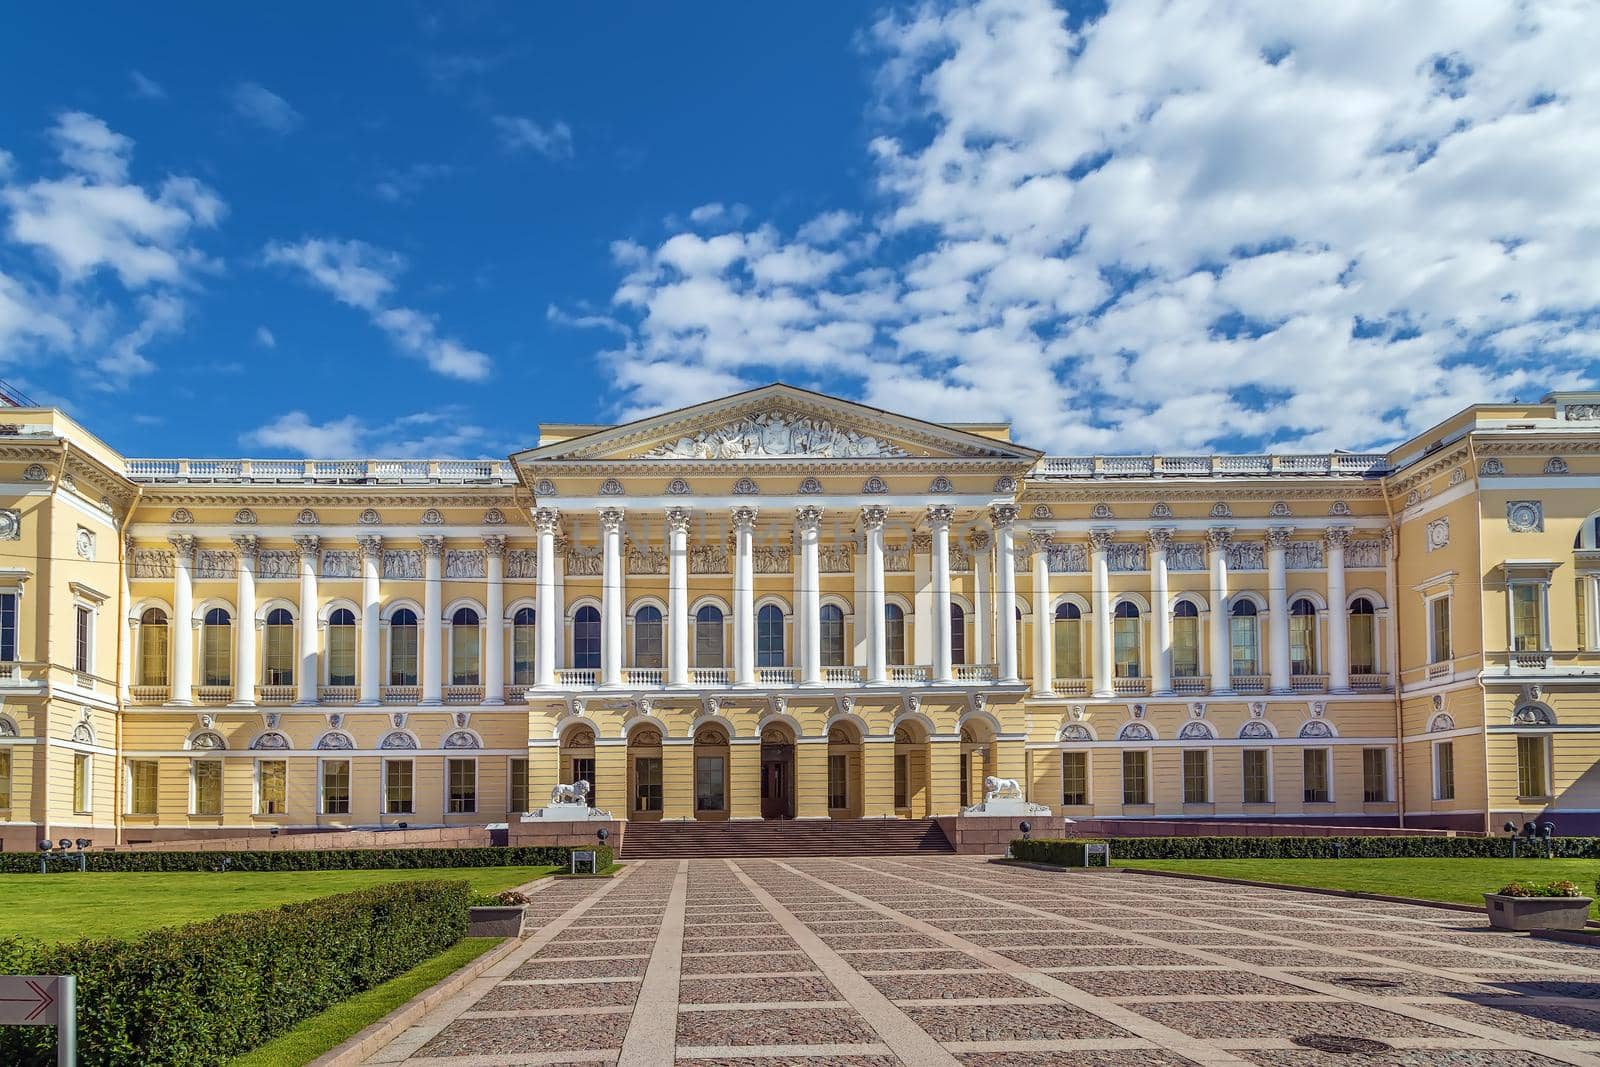 State Russian Museum formerly the Russian Museum of His Imperial Majesty Alexander III is the largest depository of Russian fine art in Saint Petersburg, Russia